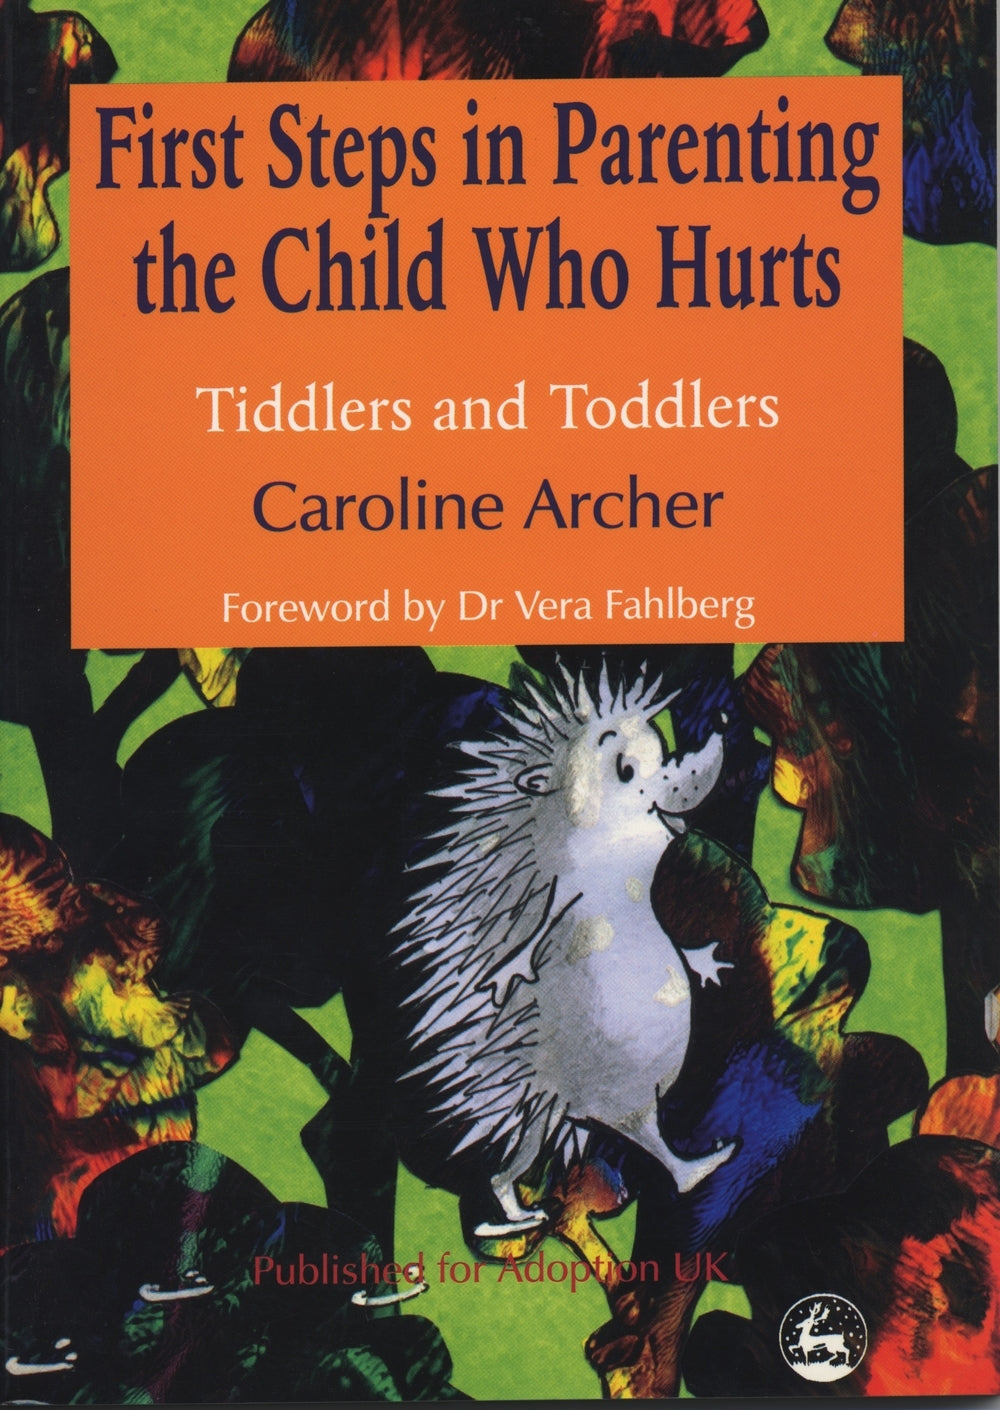 First Steps in Parenting the Child who Hurts by Caroline Archer